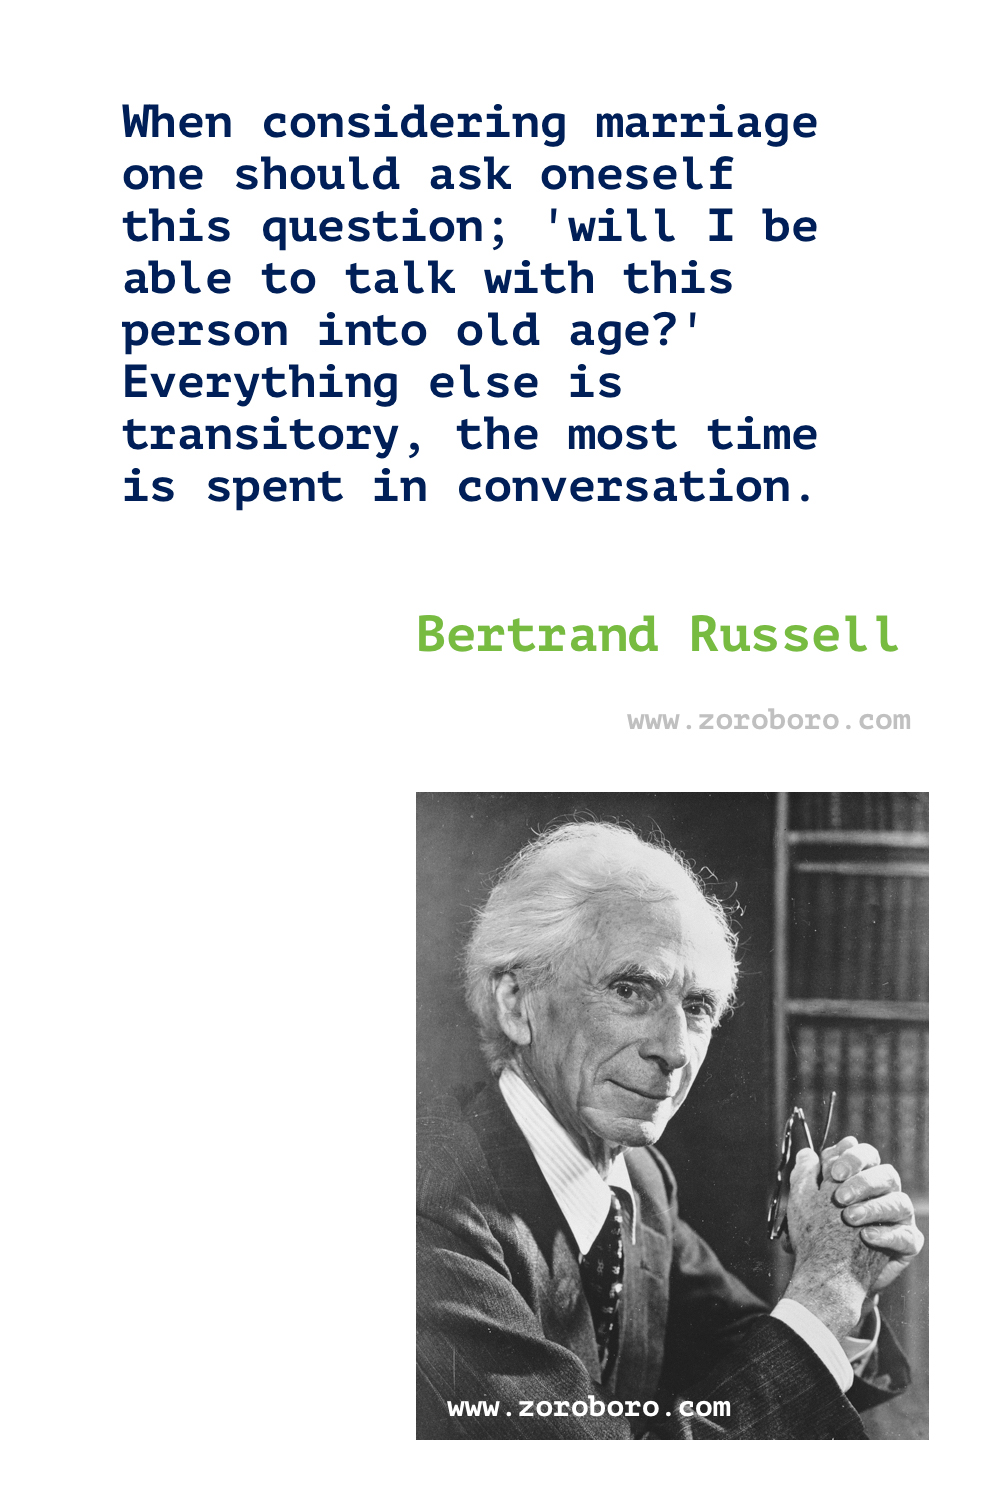 Bertrand Russell Quotes. Bertrand Russell Books, Essay Quotes. Bertrand Russell 10 commandments. Bertrand Russell Philosophy. Bertrand Russell Love, Happiness, Science, Human, Psychology & Religion Quotes. Bertrand Russell,Bertrand Russell's Books Quotes - The Problems of Philosophy, A History of Western Philosophy, The Conquest of Happiness, Marriage and Morals, Sceptical Essays, Unpopular, & Why Men Fight